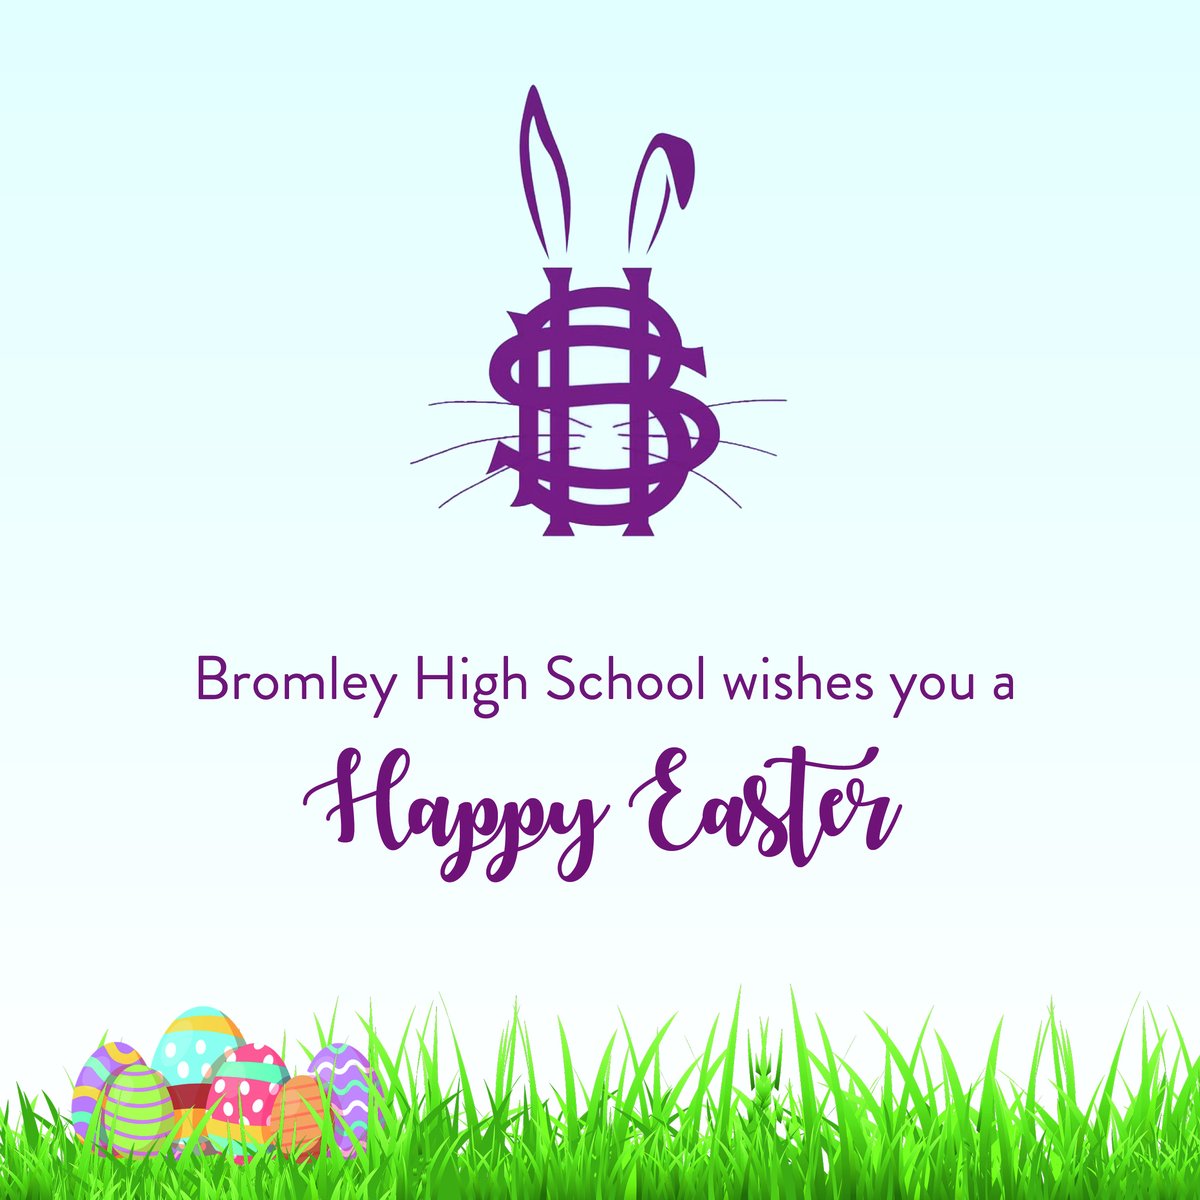 Bromley High School wishes everyone a Happy Easter! 🐣